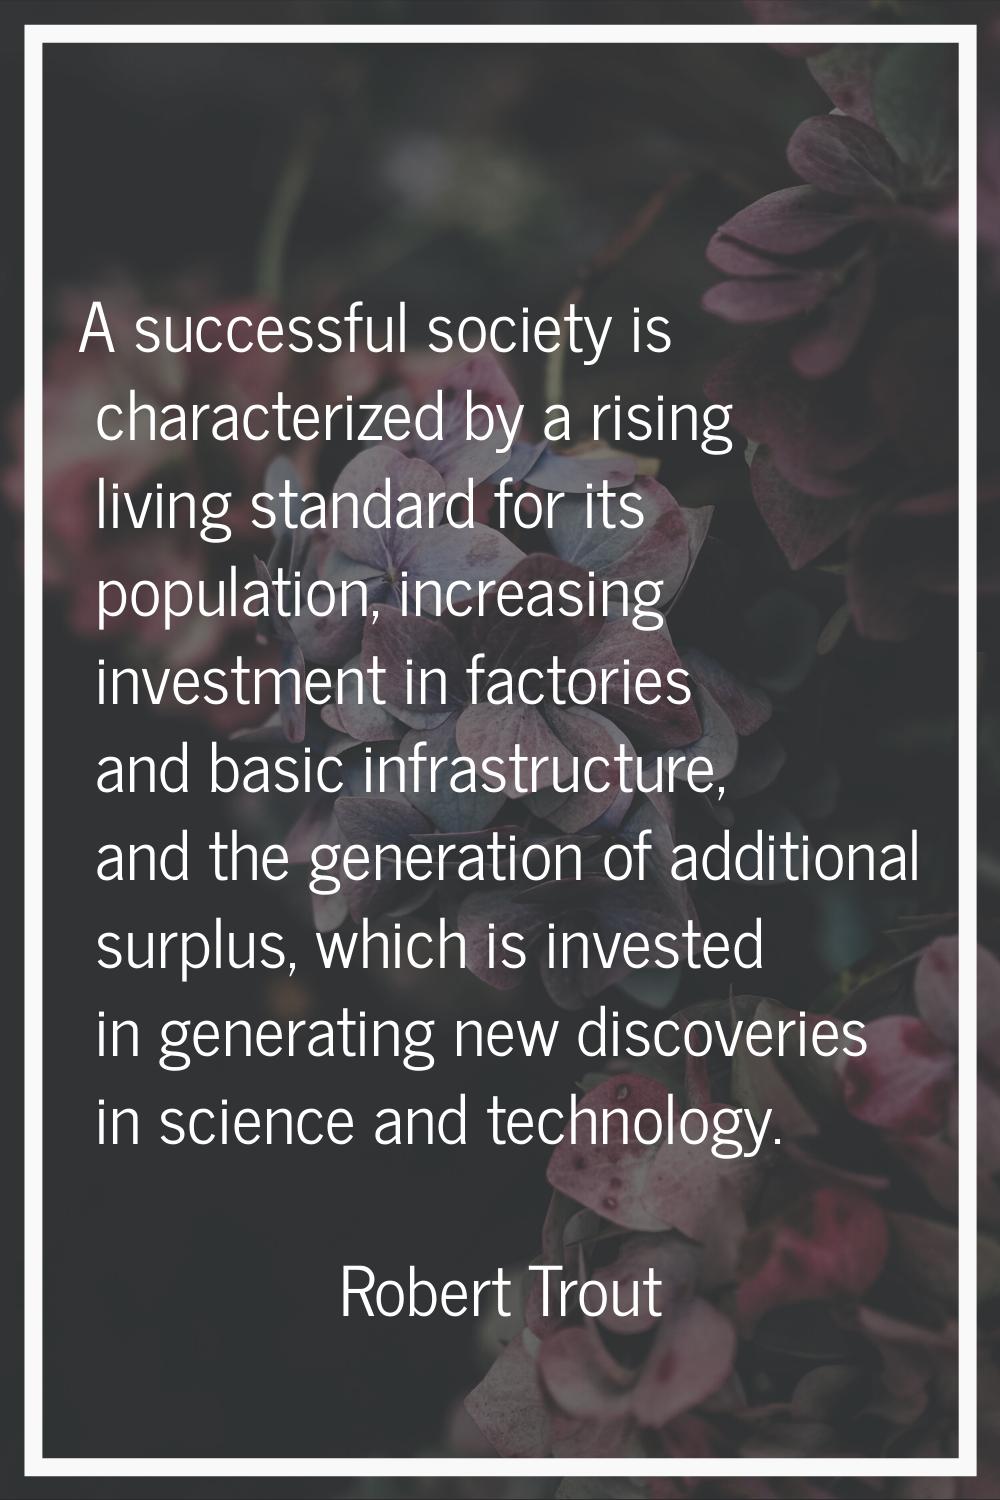 A successful society is characterized by a rising living standard for its population, increasing in